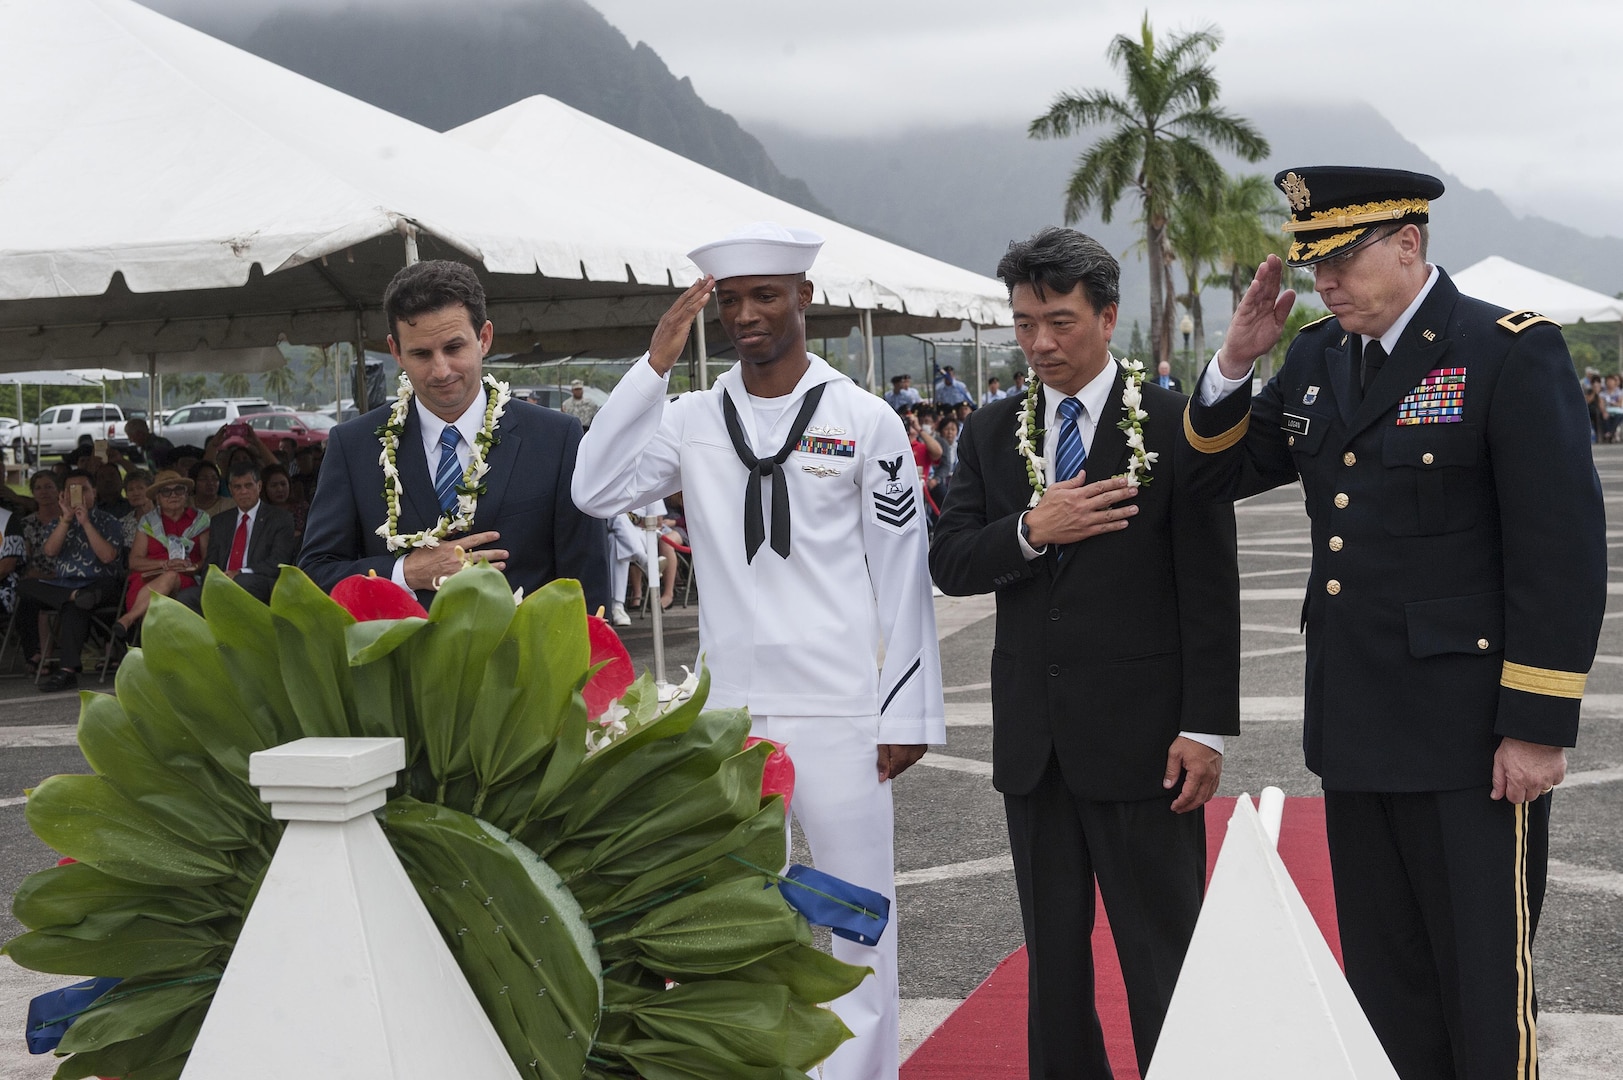 Brian Schatz (left), senior United States senator of Hawaii, Shan Tsutsui (center right), lieutenant governor of Hawaii, and U.S. Army Maj. Gen. Arthur J. Logan, the adjutant general of the state of Hawaii, render their respects alongside a U.S. Navy Sailor during a wreath laying as part of the 2015 Governor’s Veterans Day Ceremony at the Hawaii State Veterans Cemetery Nov. 11, in Kaneohe, Hawaii. U.S. Navy Adm. Harry Harris, commander of U.S. Pacific Command (PACOM), also laid a wreath with military leaders of PACOM and the U.S. Coast Guard during the ceremony. (U.S. Air Force photo by Staff Sgt. Christopher Hubenthal)